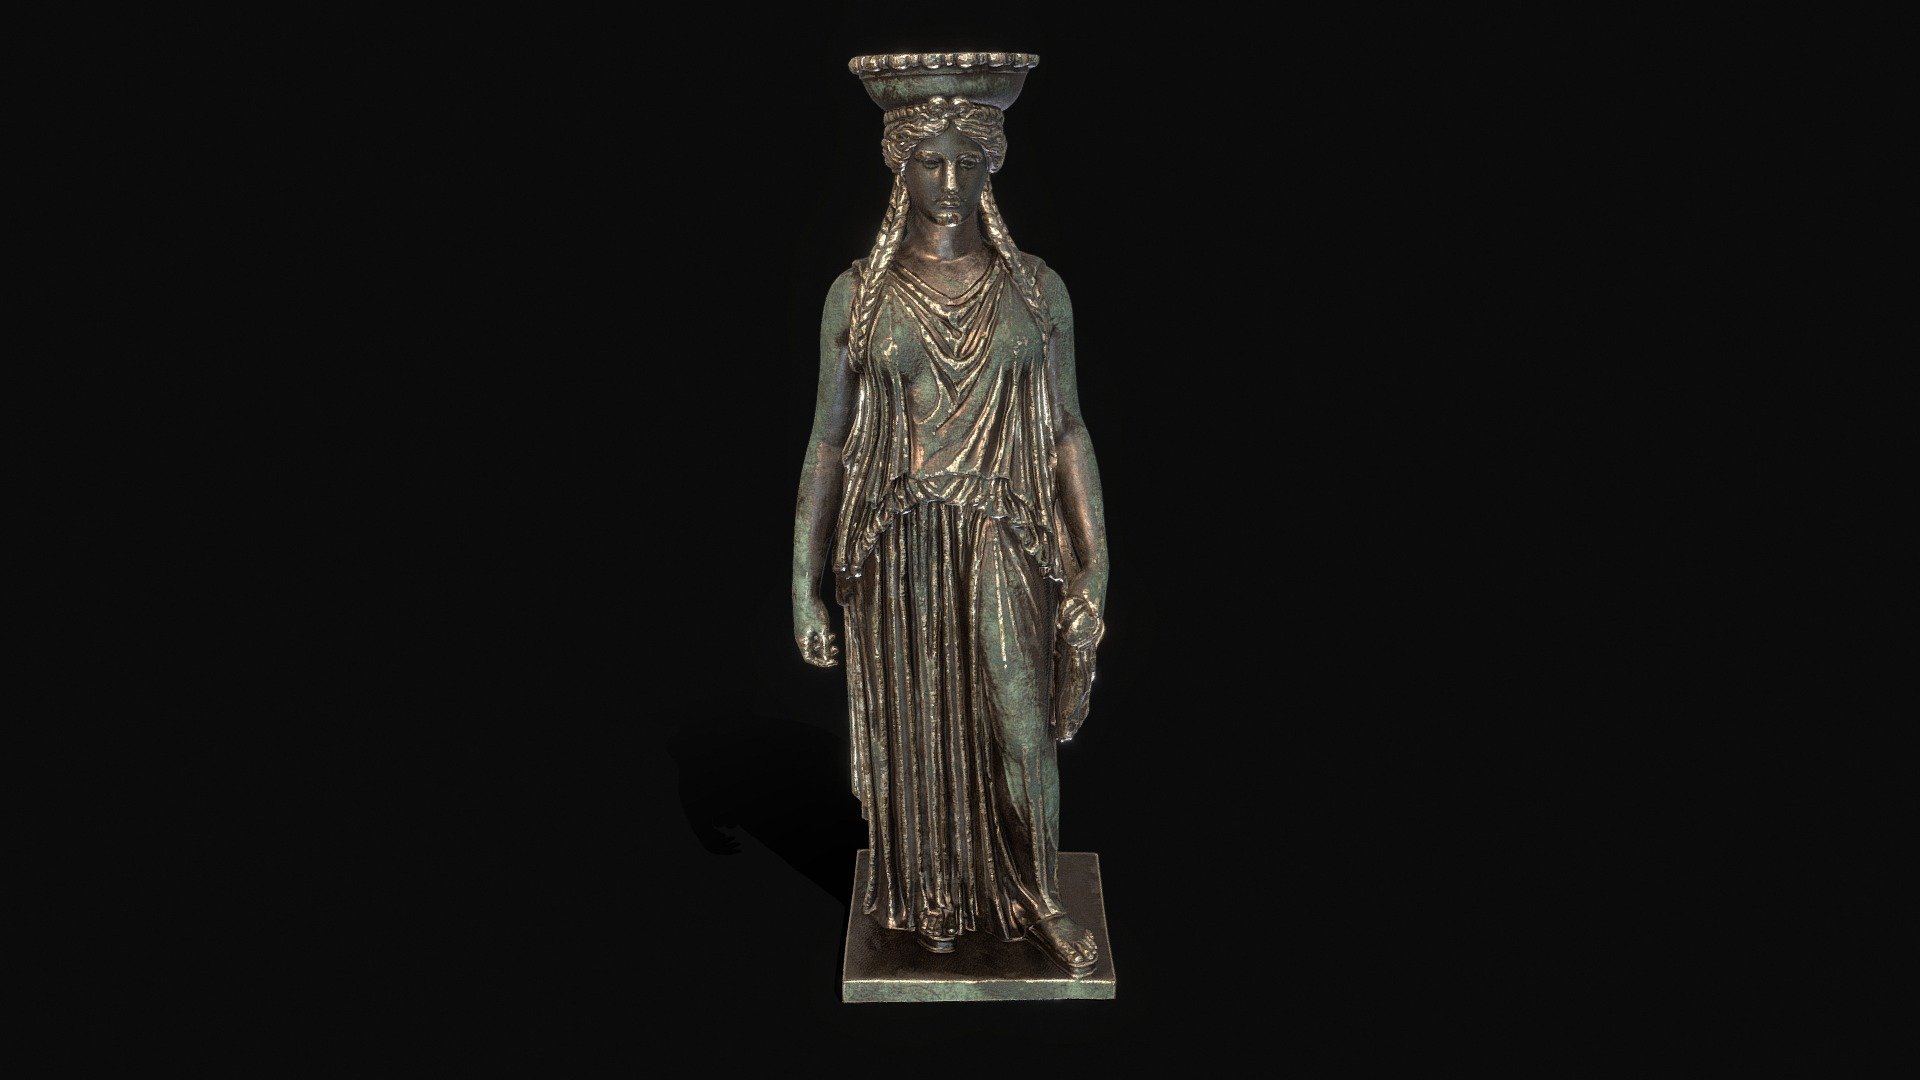 more info



✅included:




.blend files

High and Low poly FBX, OBJ, and STL files

All textures

✅details:




decimated for comfortable use

Low Poly model has10k - 35k vertices

UV unwrapped

Textures are 4k

All Textures is packed in .blend file
 - Caryatid C, Erechtheion of the Acropolis - 3D model by dada-design 3d model